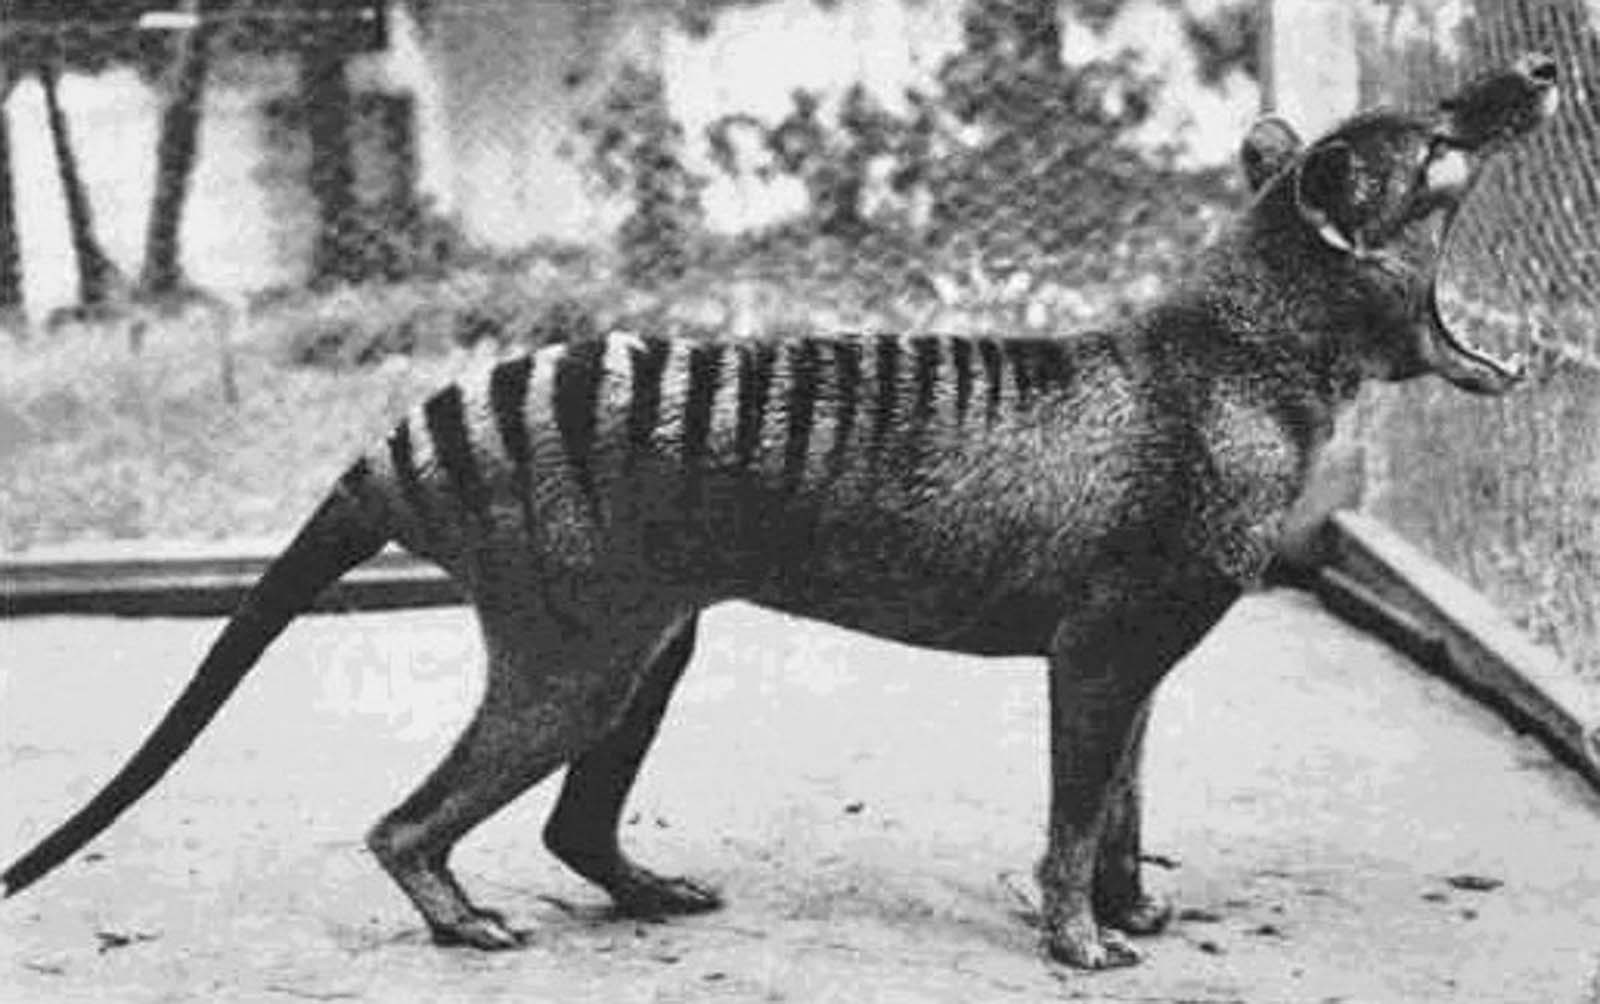 The last living thylacine in captivity yawns at the Hobart Zoo. Thylacines were capable of opening their jaws as wide as 80 degrees. 1933.